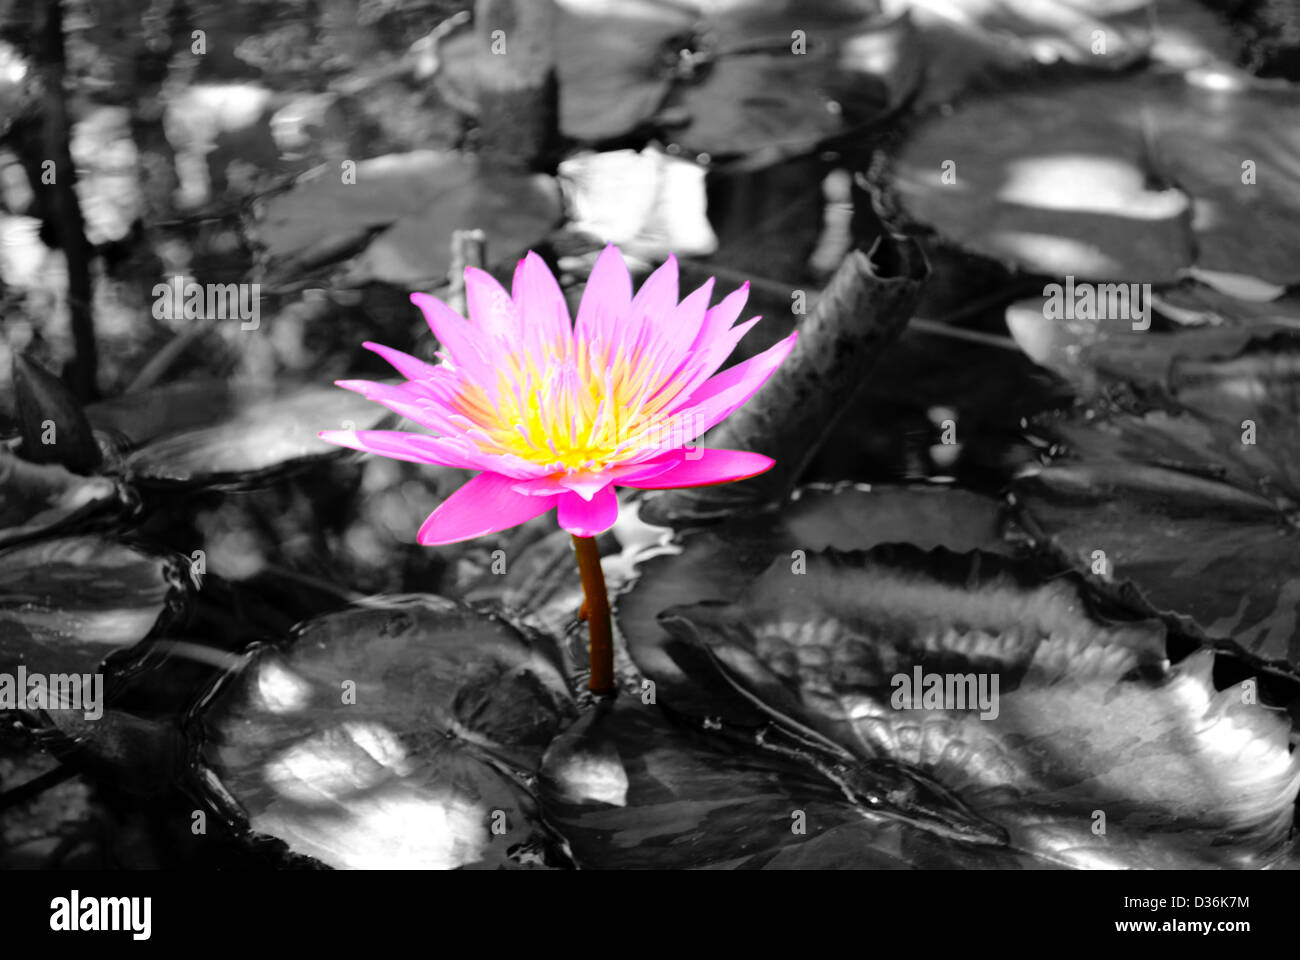 Water lily flower Latin name Nymphaea colorata Stock Photo